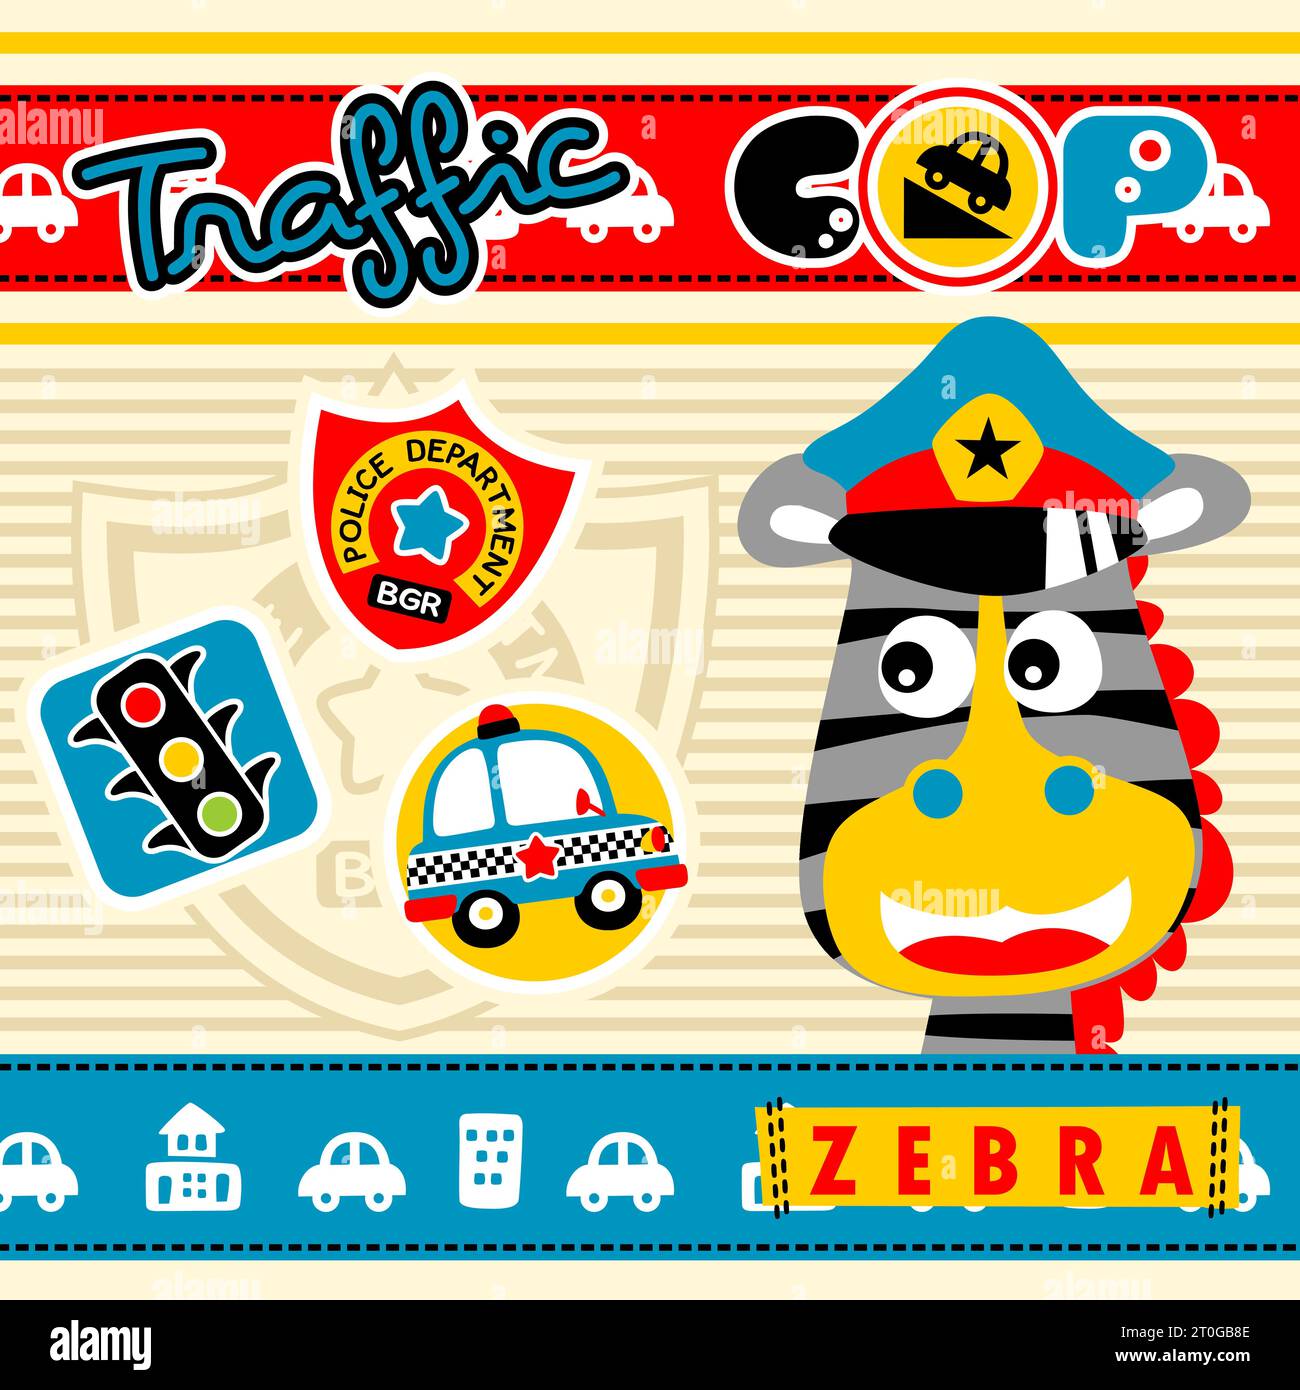 Cute zebra the animal cop with traffic elements on striped background, vector cartoon illustration Stock Vector